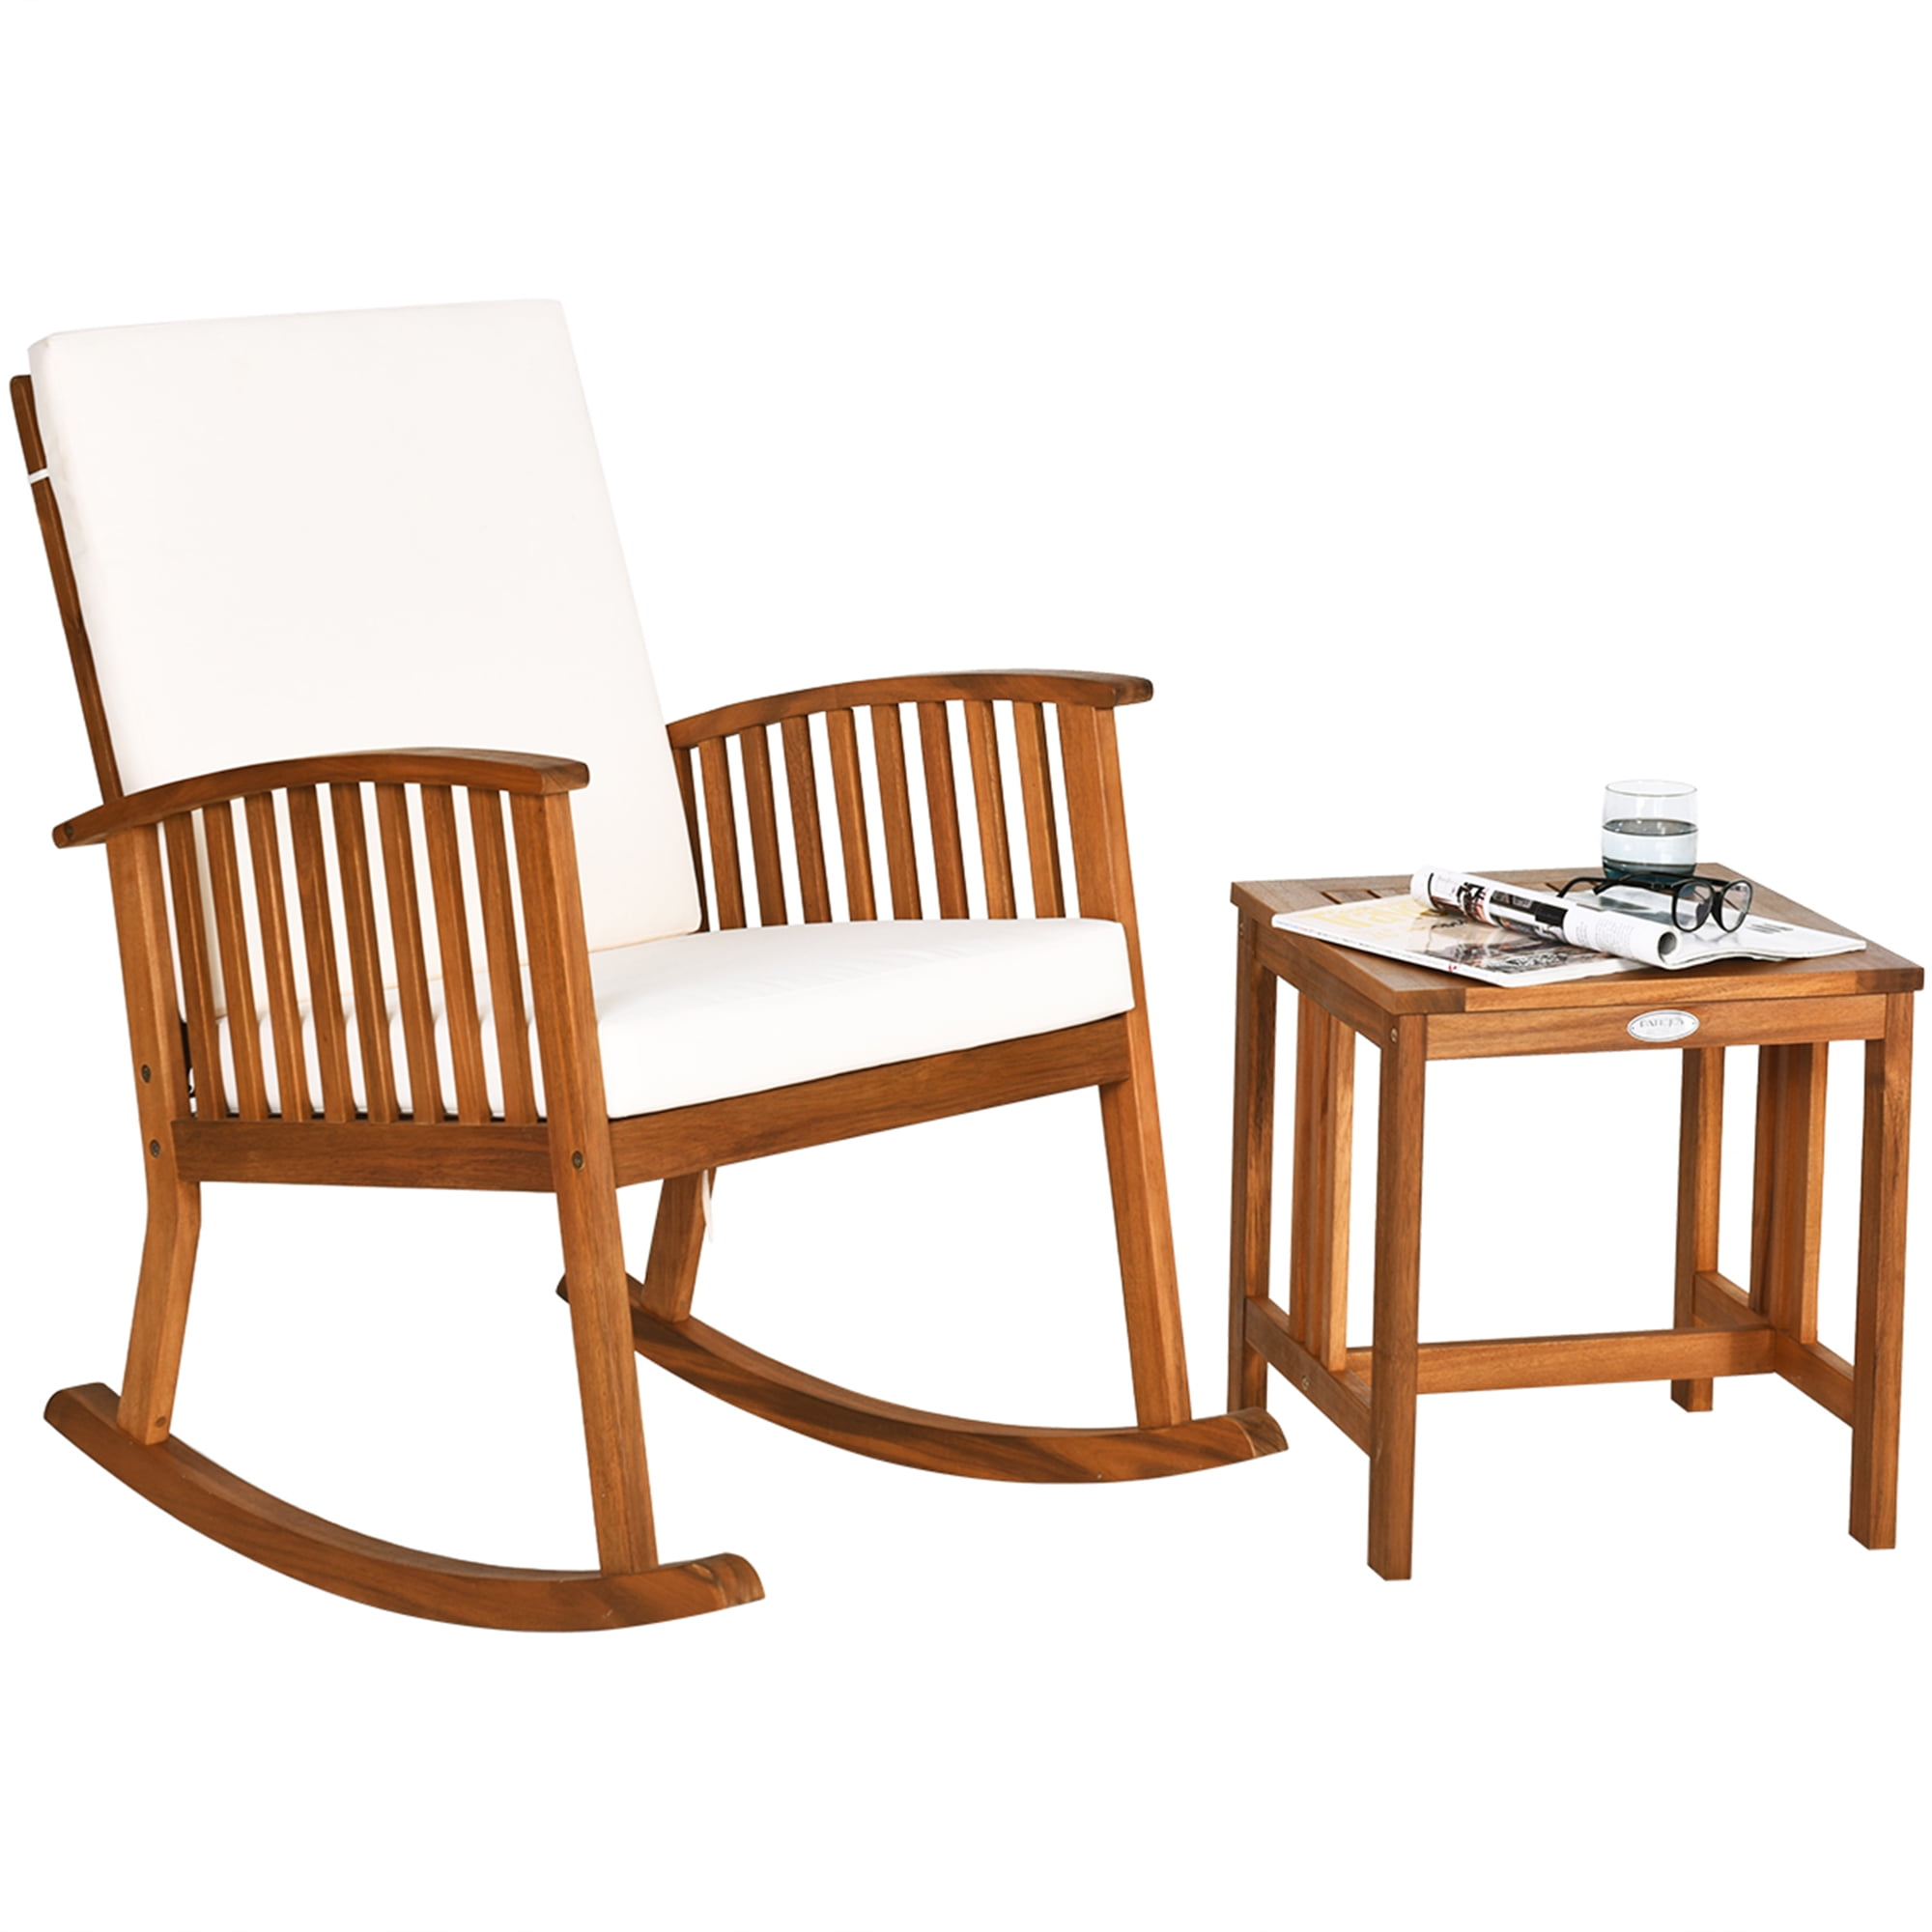 Acacia Wood Patio Rocking Chair Set, Outdoor Wooden Rocking Chairs Australia